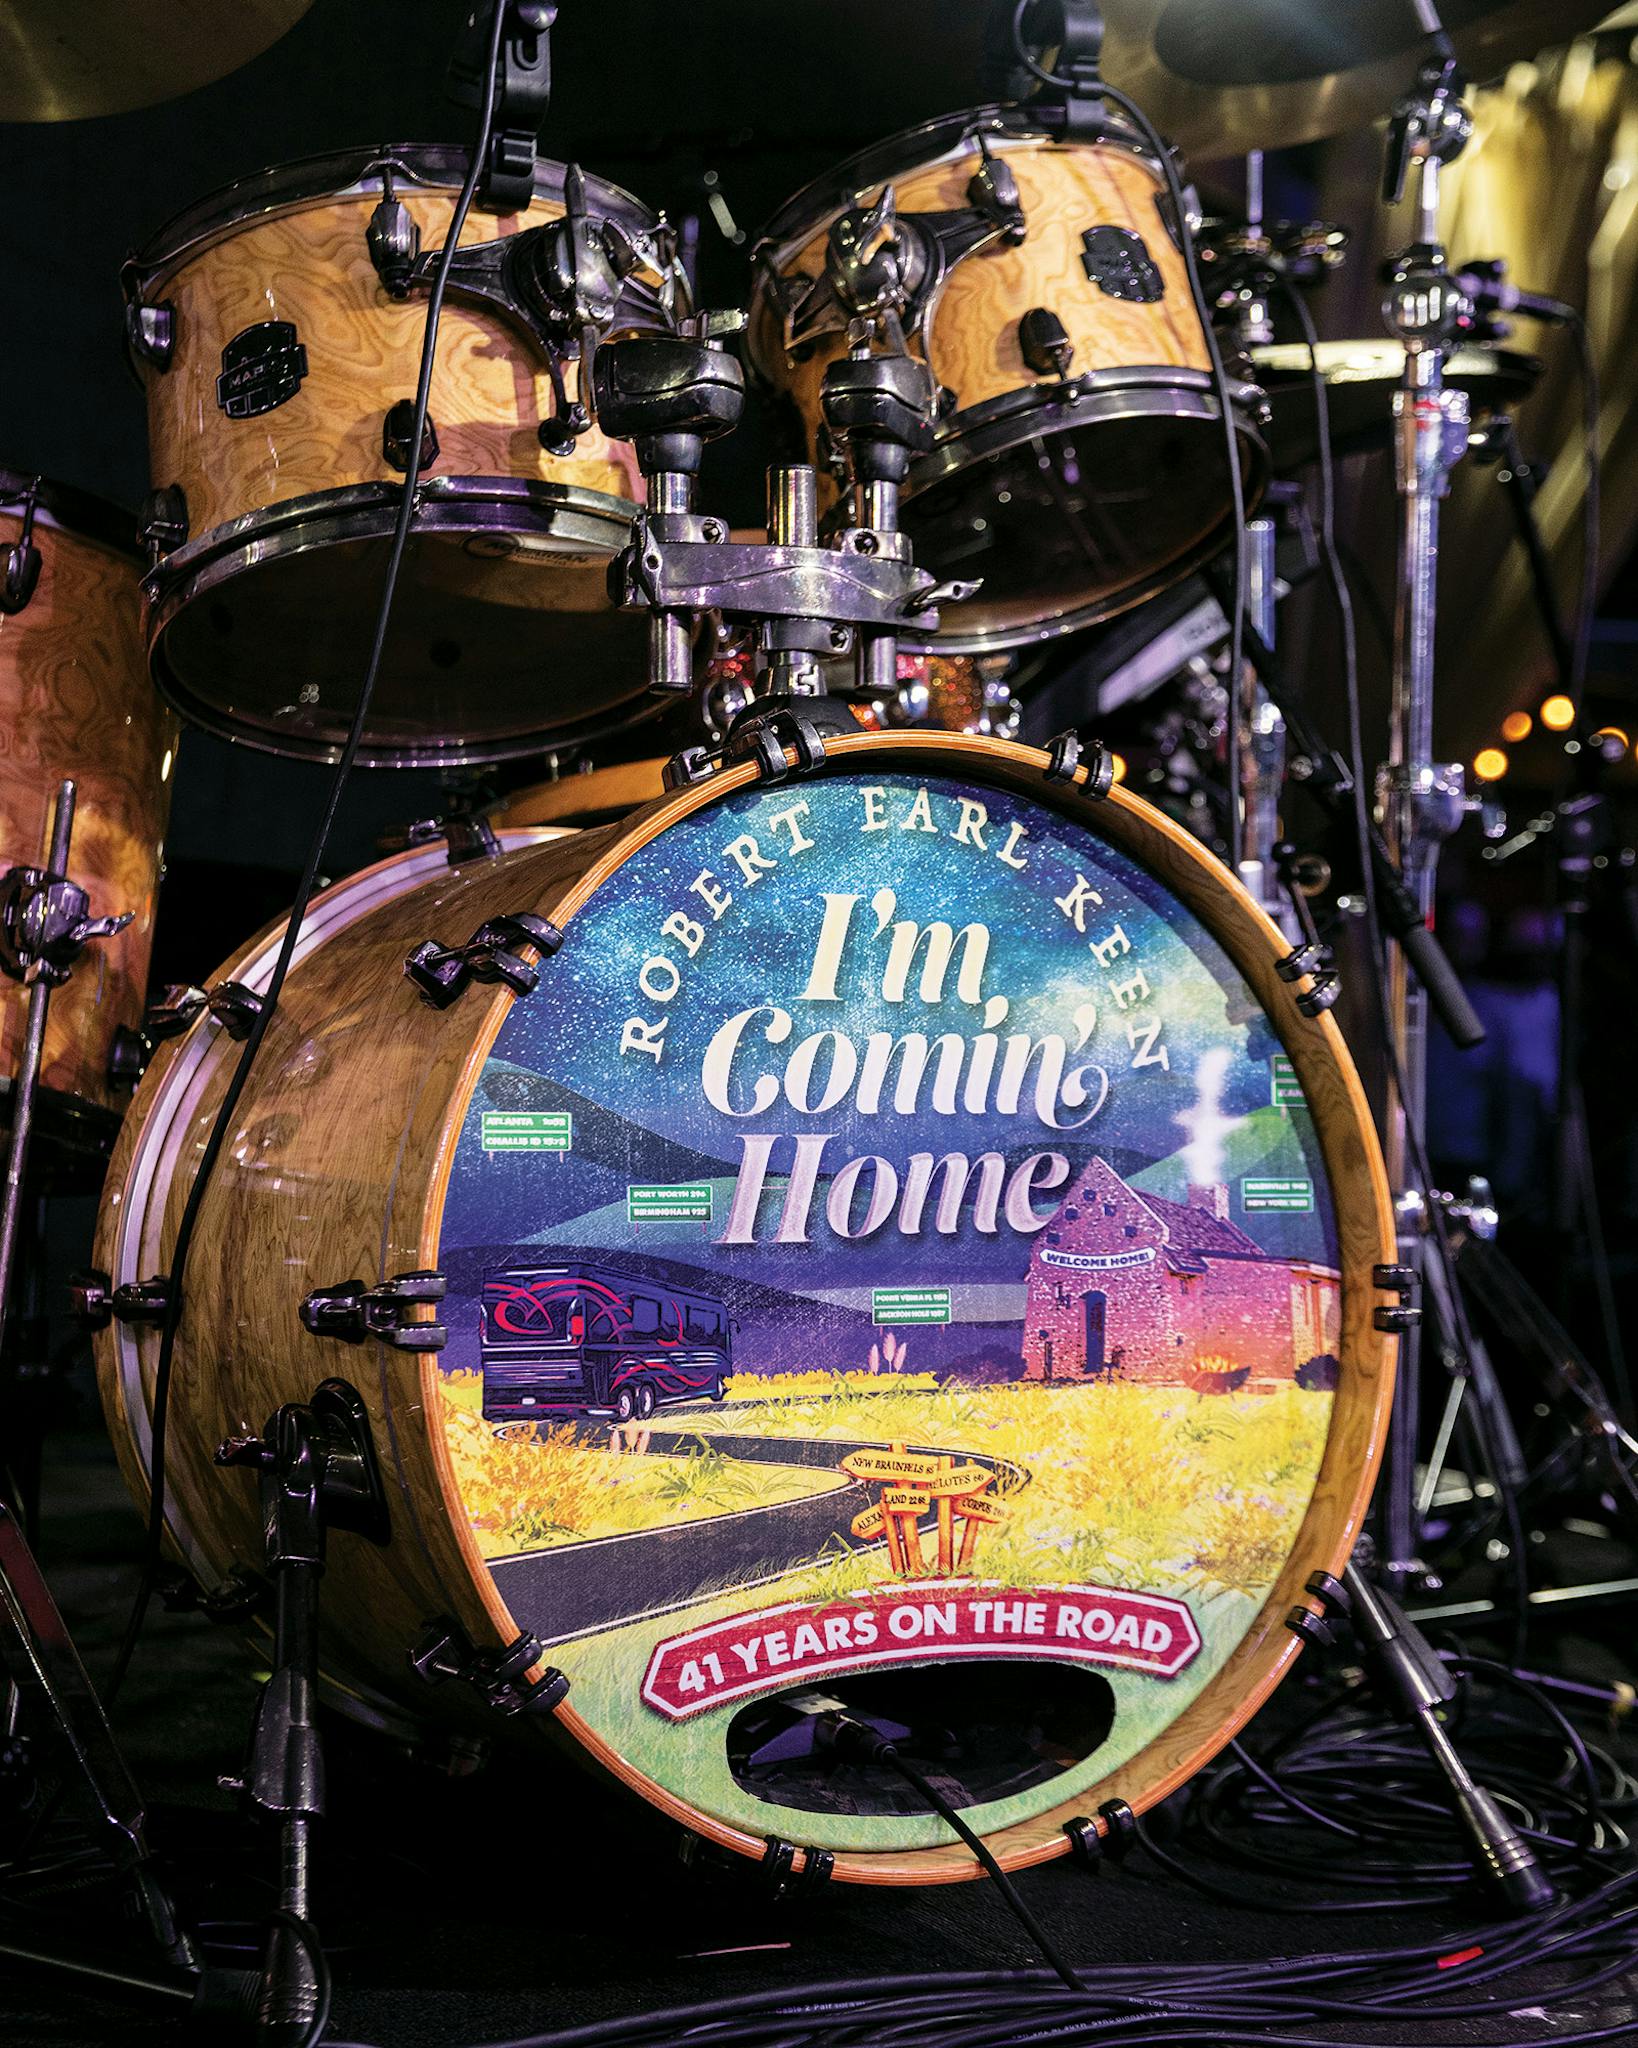 A drum head commemorating Robert Earl Keen’s 41 years on the road is seen at John T. Floore’s Country Store in Helotes, Texas, on Sept. 3, 2022.